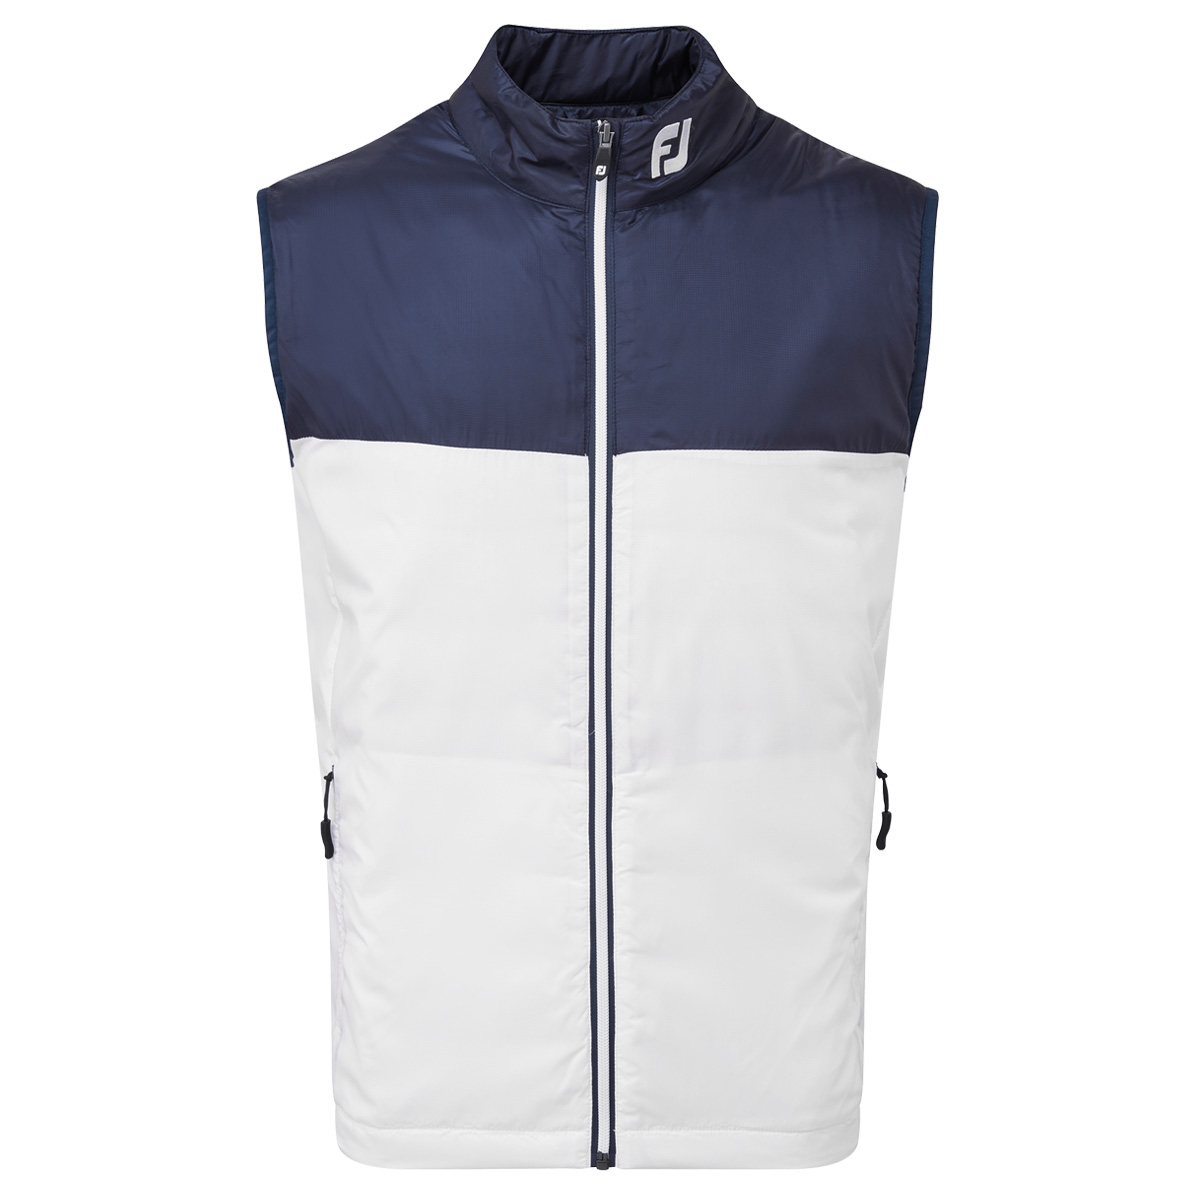 FootJoy Lightweight Thermal Insulated Vest Gilet  - Navy/White